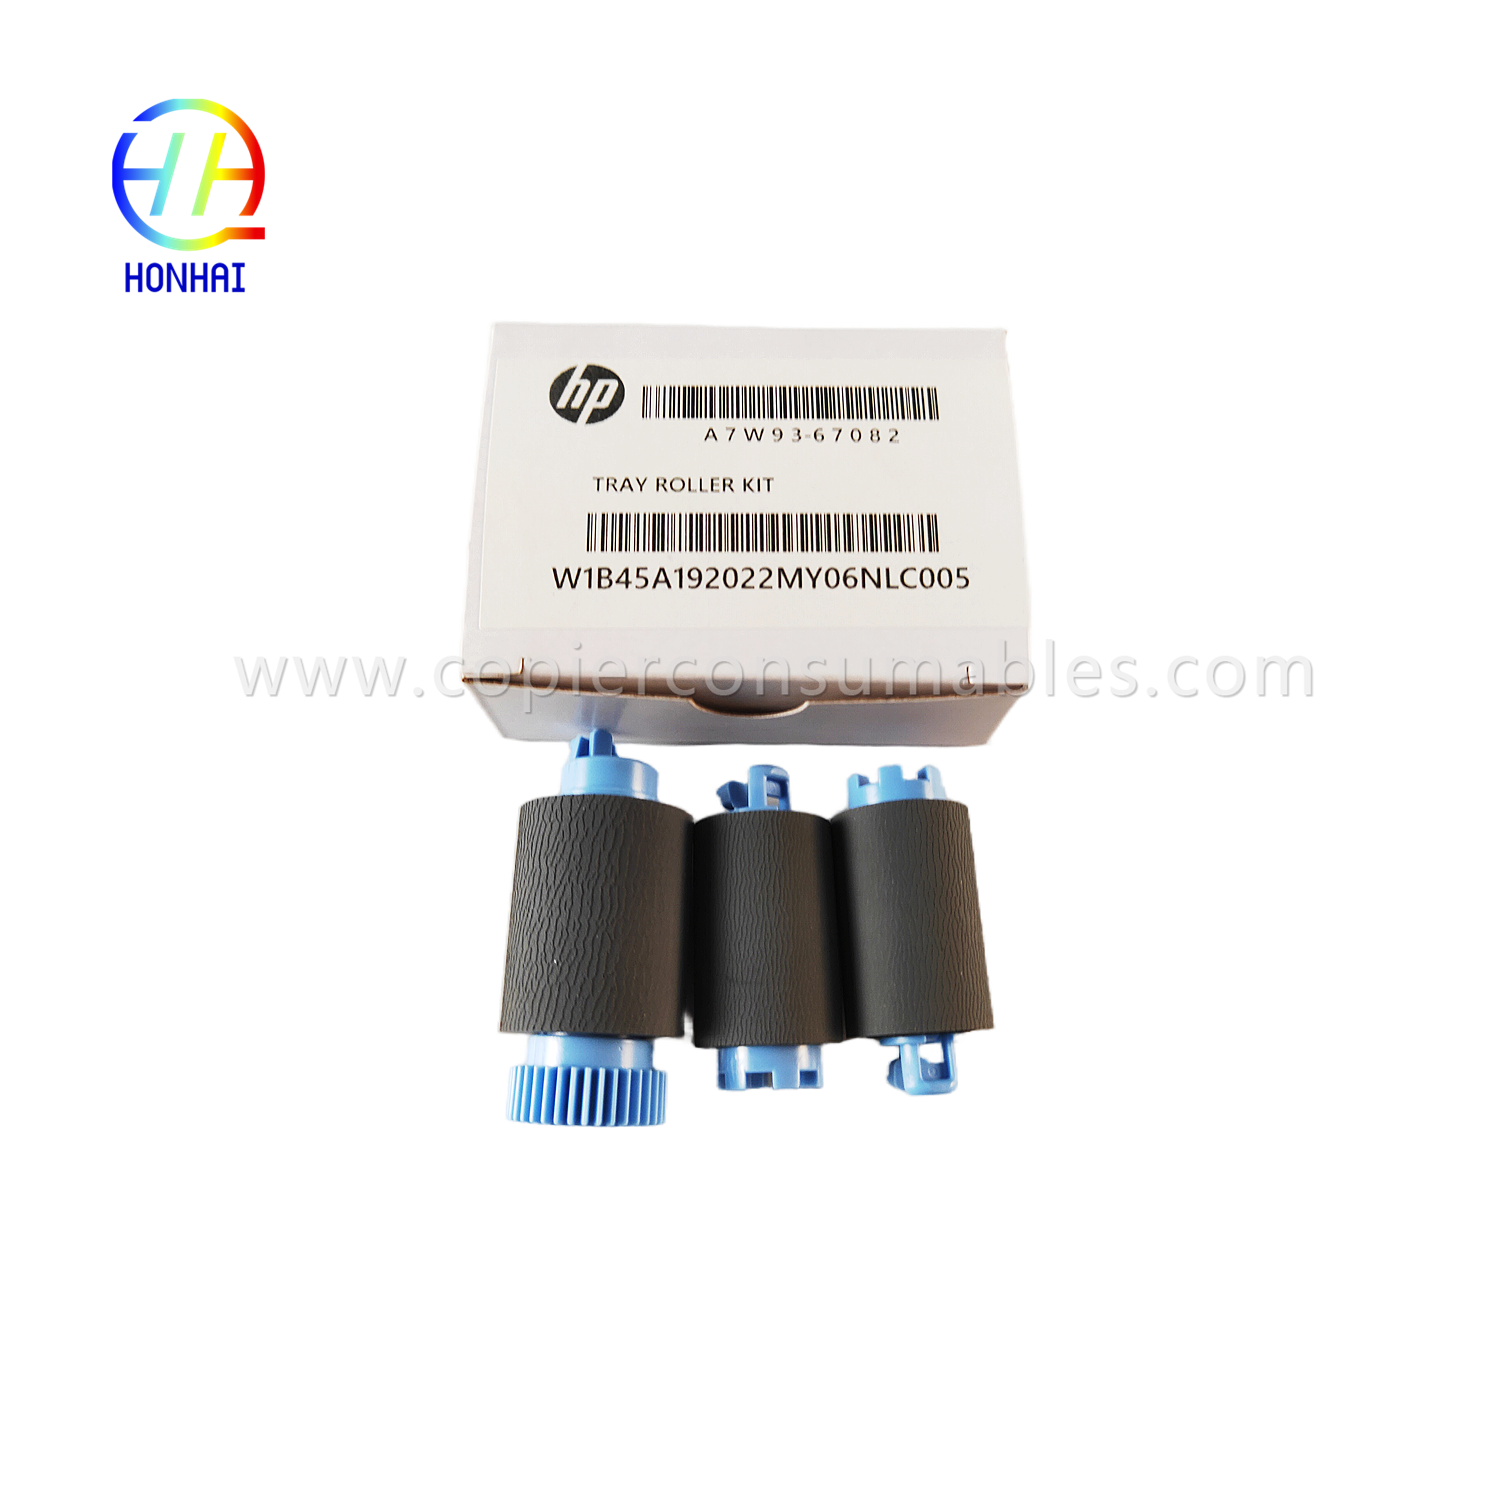 https://www.copierconsumables.com/tray-2-5-pickup-feed-separation-roller-set-for-hp-a7w93-67082-mfp-785f-780dn-e77650z-e77660z-e77650dn-e77670dn-e77650dn-e77670dn p77750z-p77760z-p75050dn-p75050dw-product/